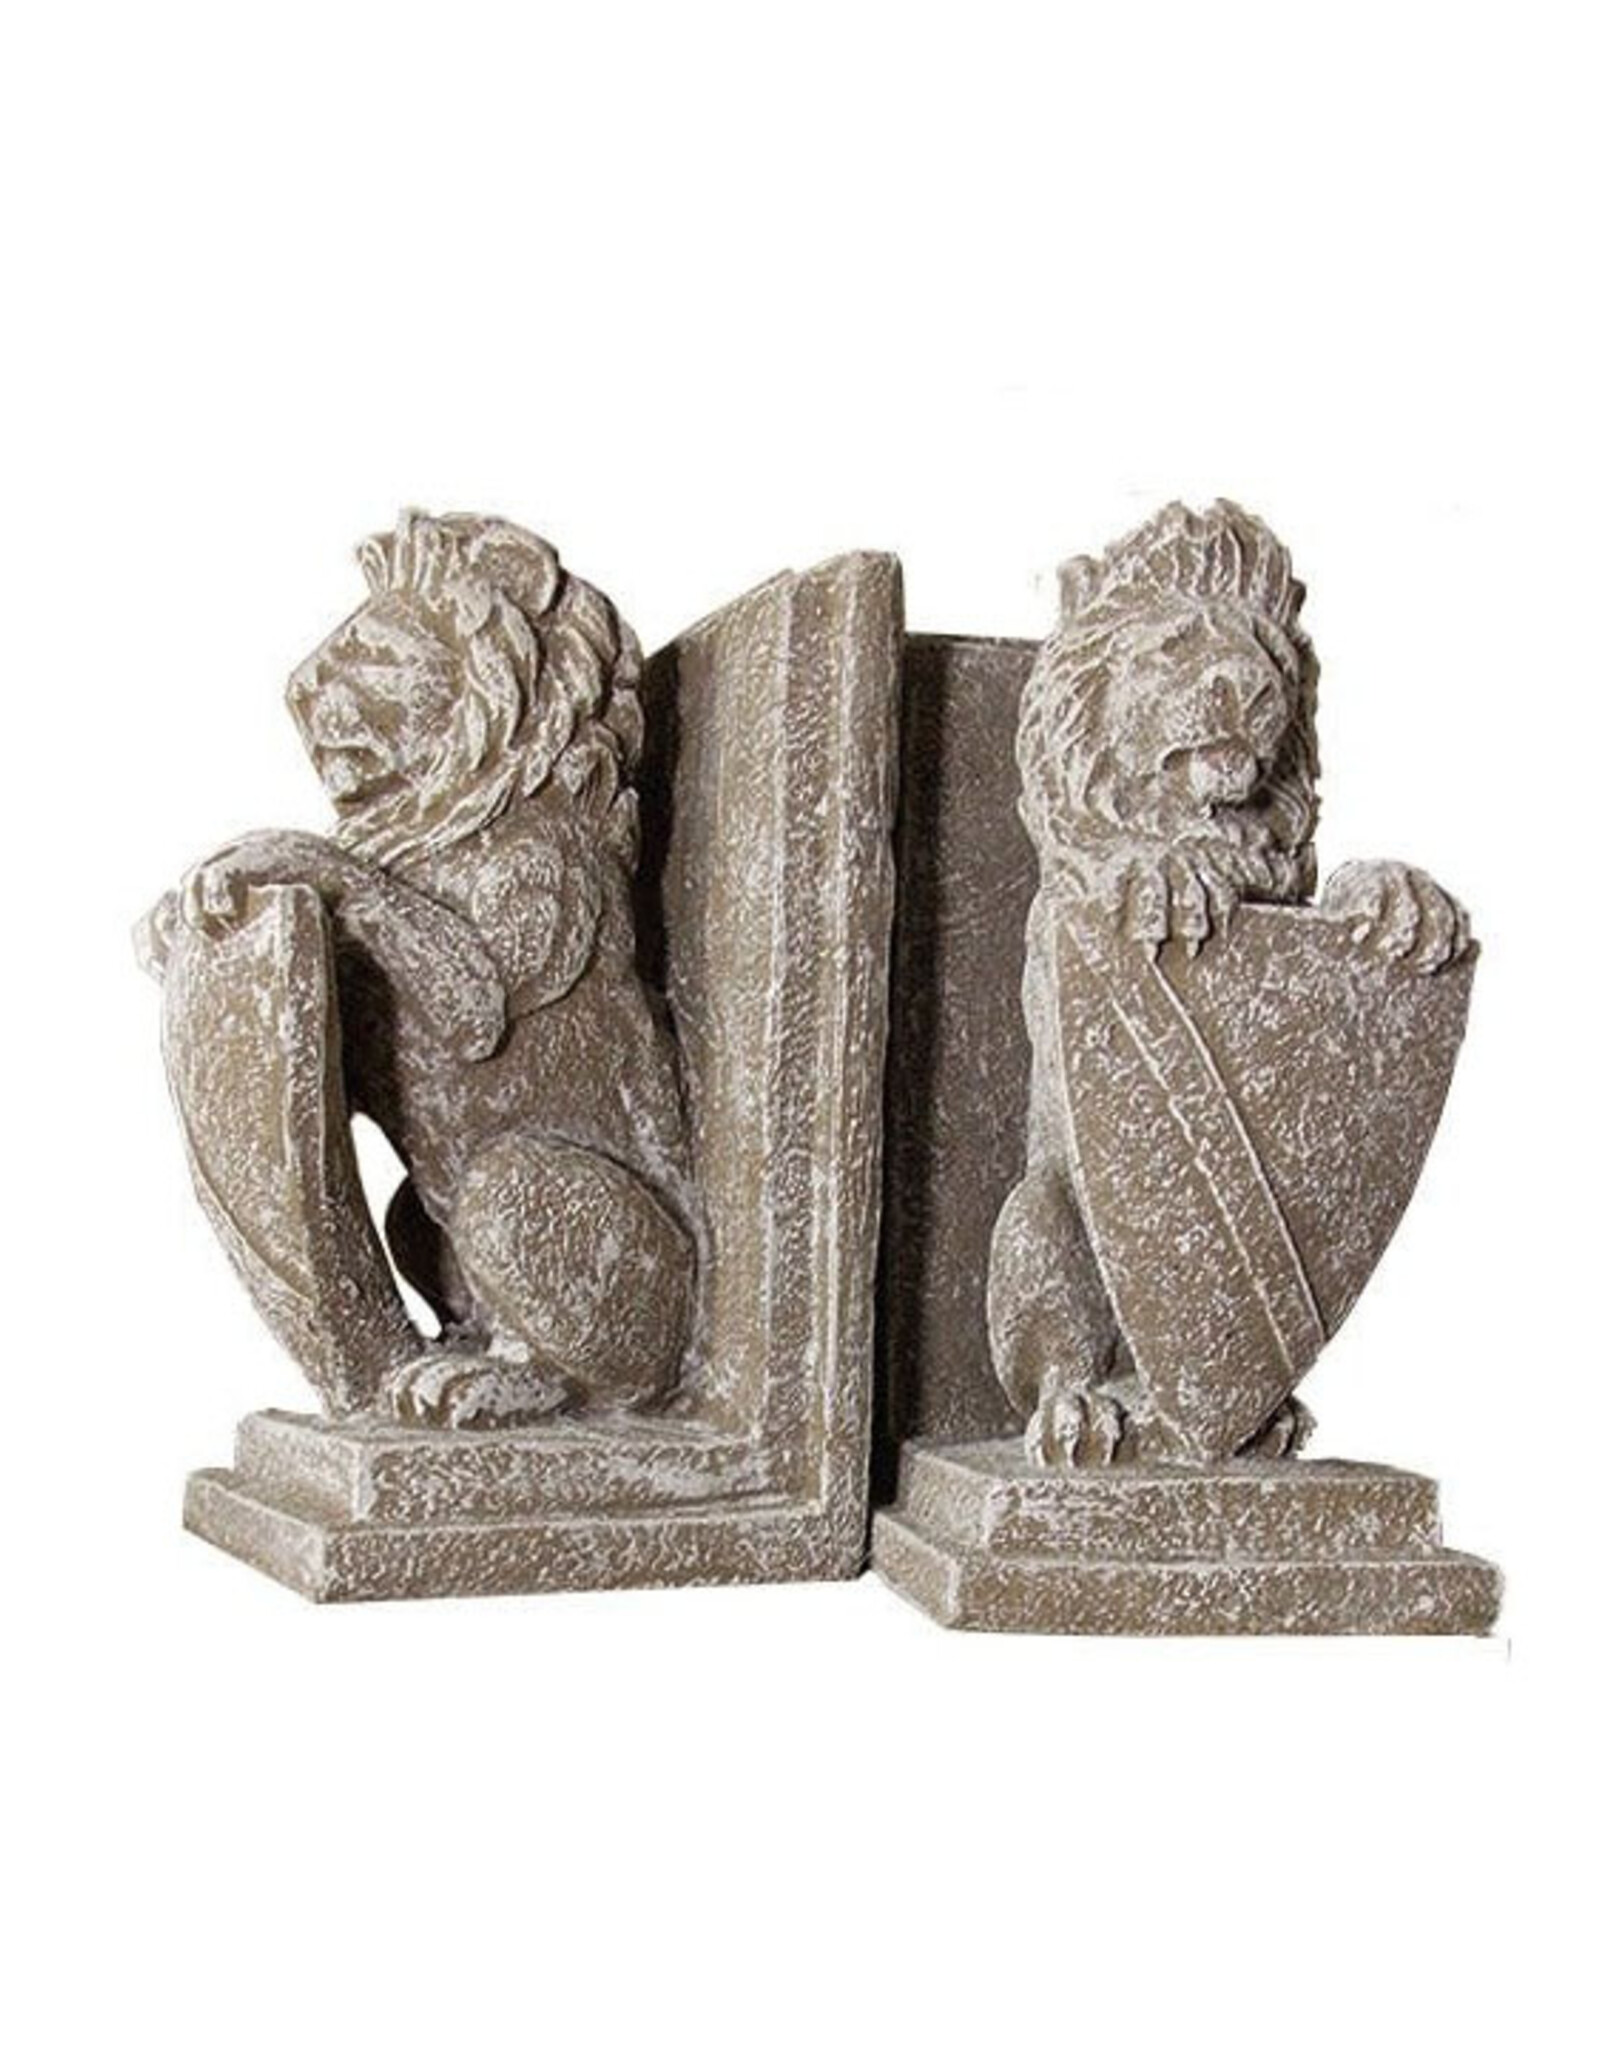 Lion Bookends - Shield - Curbside Pick Up Only